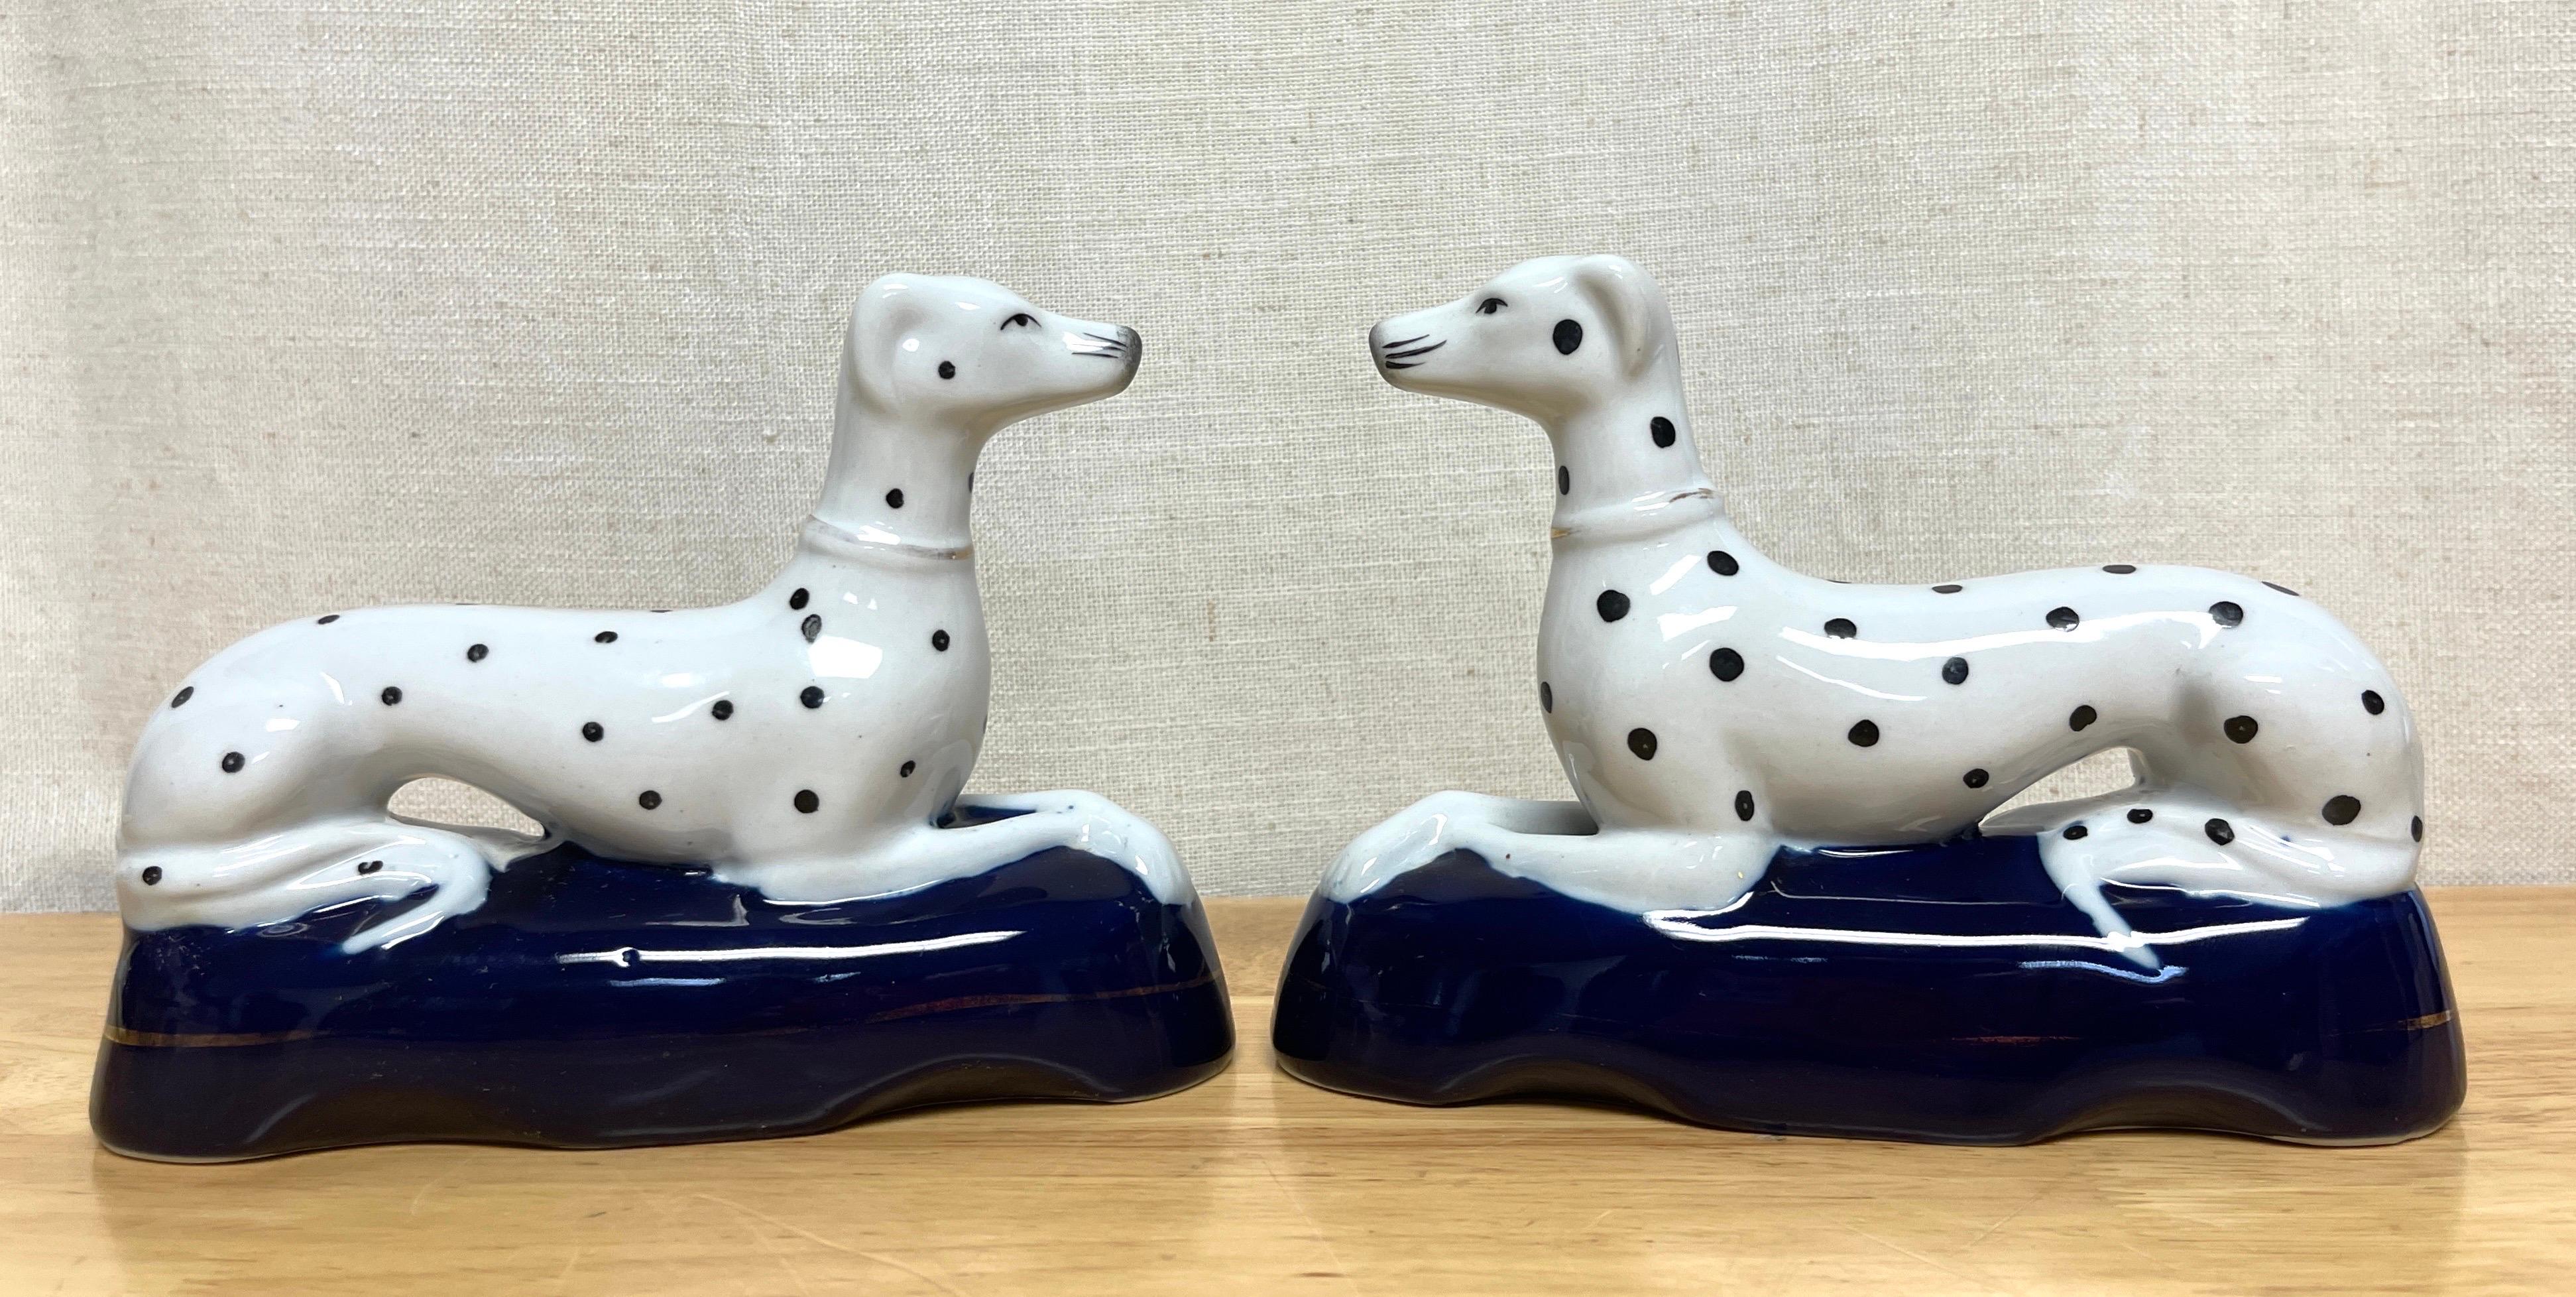 Pair of late Staffordshire Recumbent figures Dalmatians 
USA, 20th 1950s

A good pair of a later Staffordshire hand painted and enameled porcelain figures of reclining Dalmatians. Each one an elongated seated Dalmatian realistically modeled, with